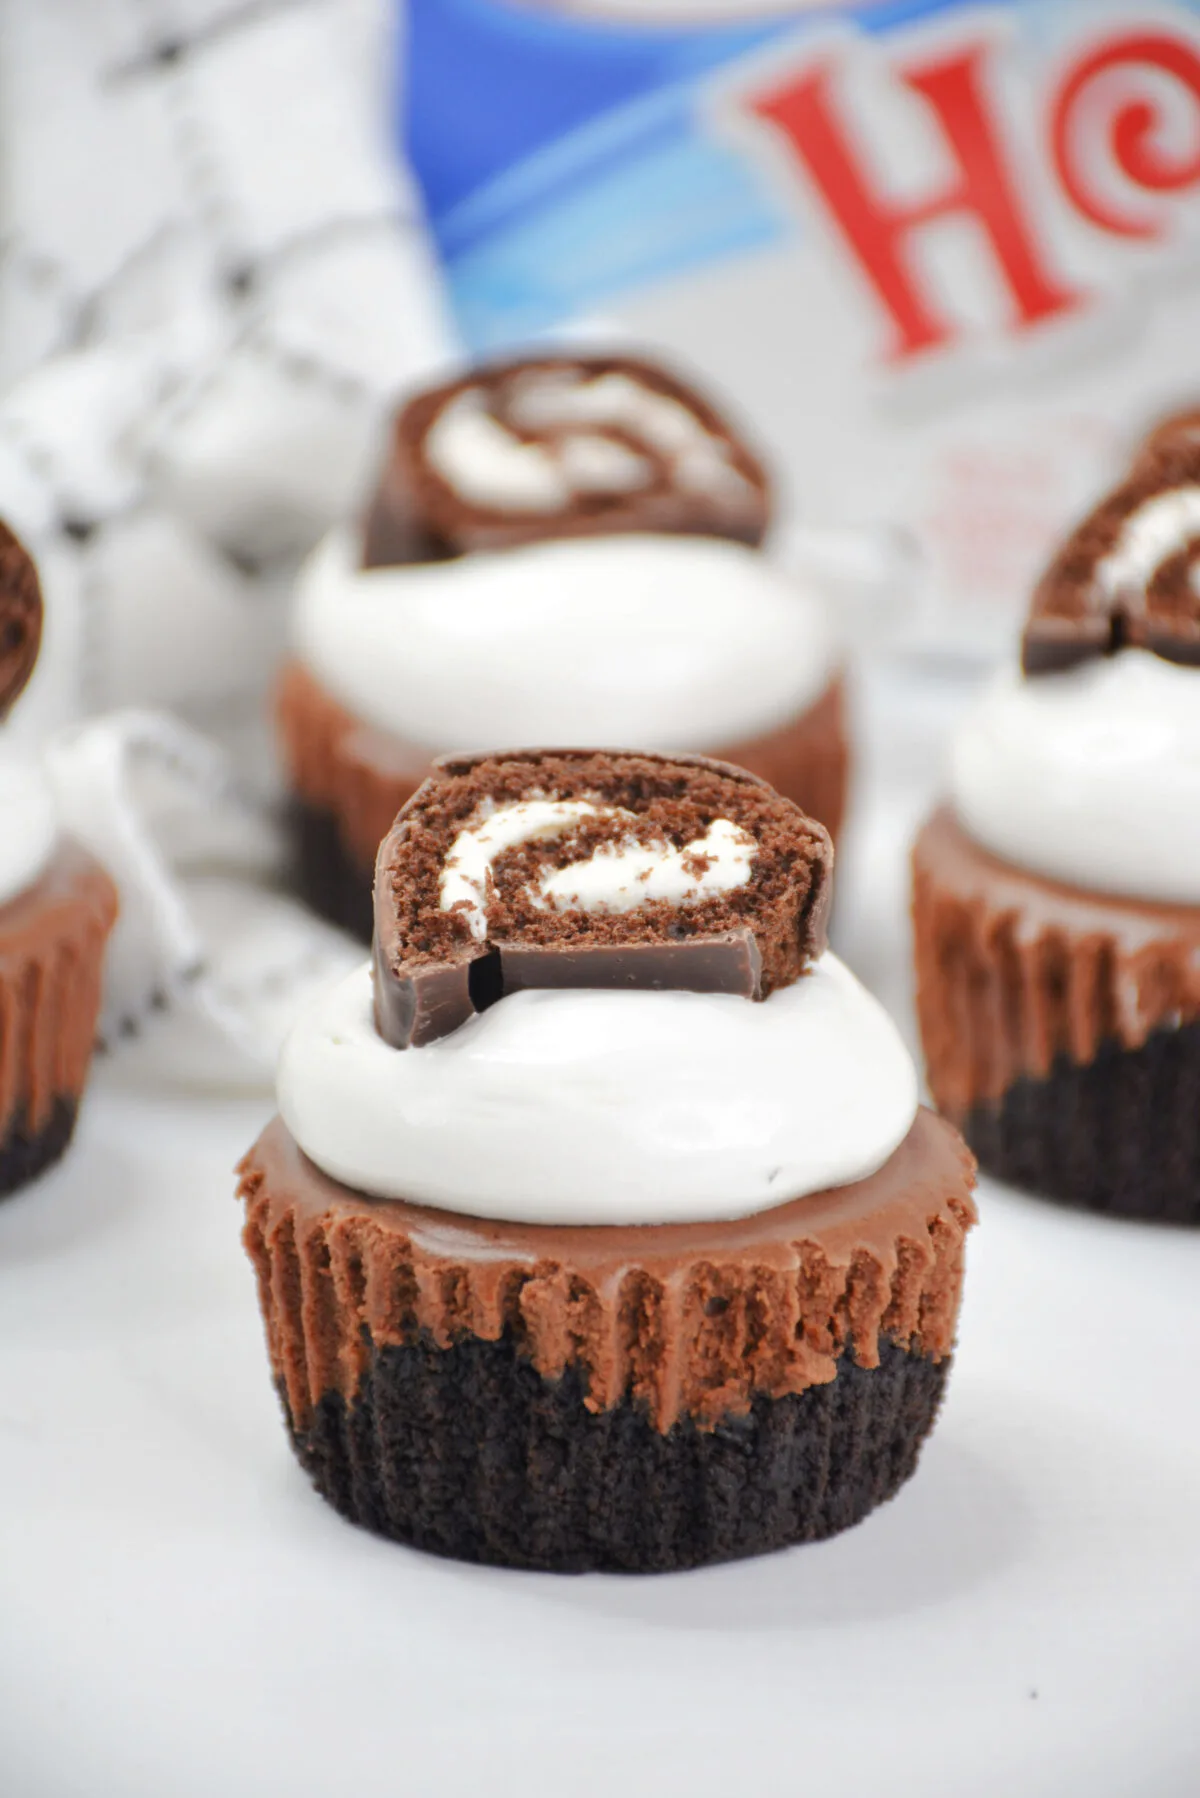 Mini chocolate Swiss roll cheesecakes are irresistible individual desserts featuring chocolate cheesecake and fluffy marshmallow frosting!